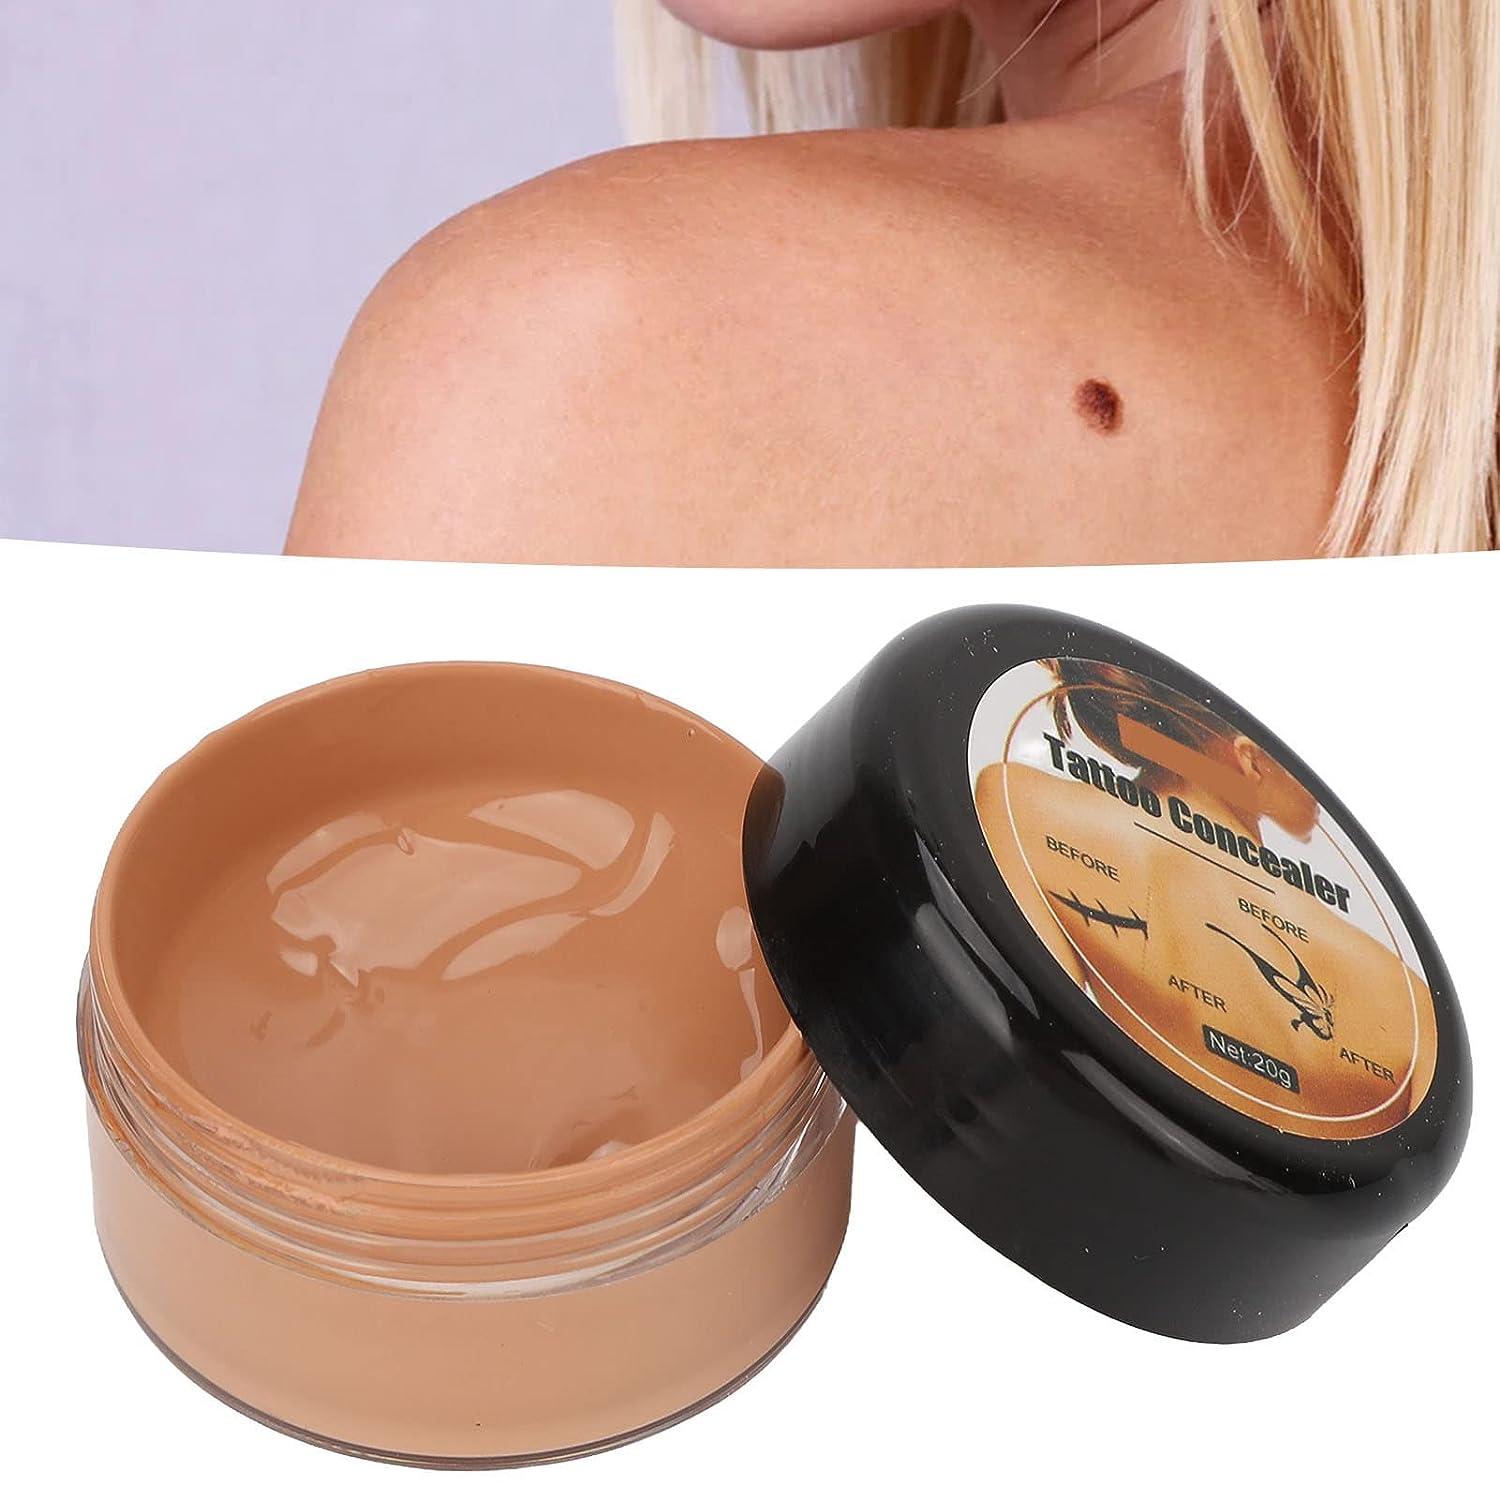 Amazon.com : Tattoo Cover Up(20gx2), Tattoo Concealer Suitable for All Skin  Tones, Tattoo Cover Up Makeup Waterproof & Sweatproof for Tattoos, Scars,  Bruises, Vitiligo, and More, a Set of 2 Colors. :